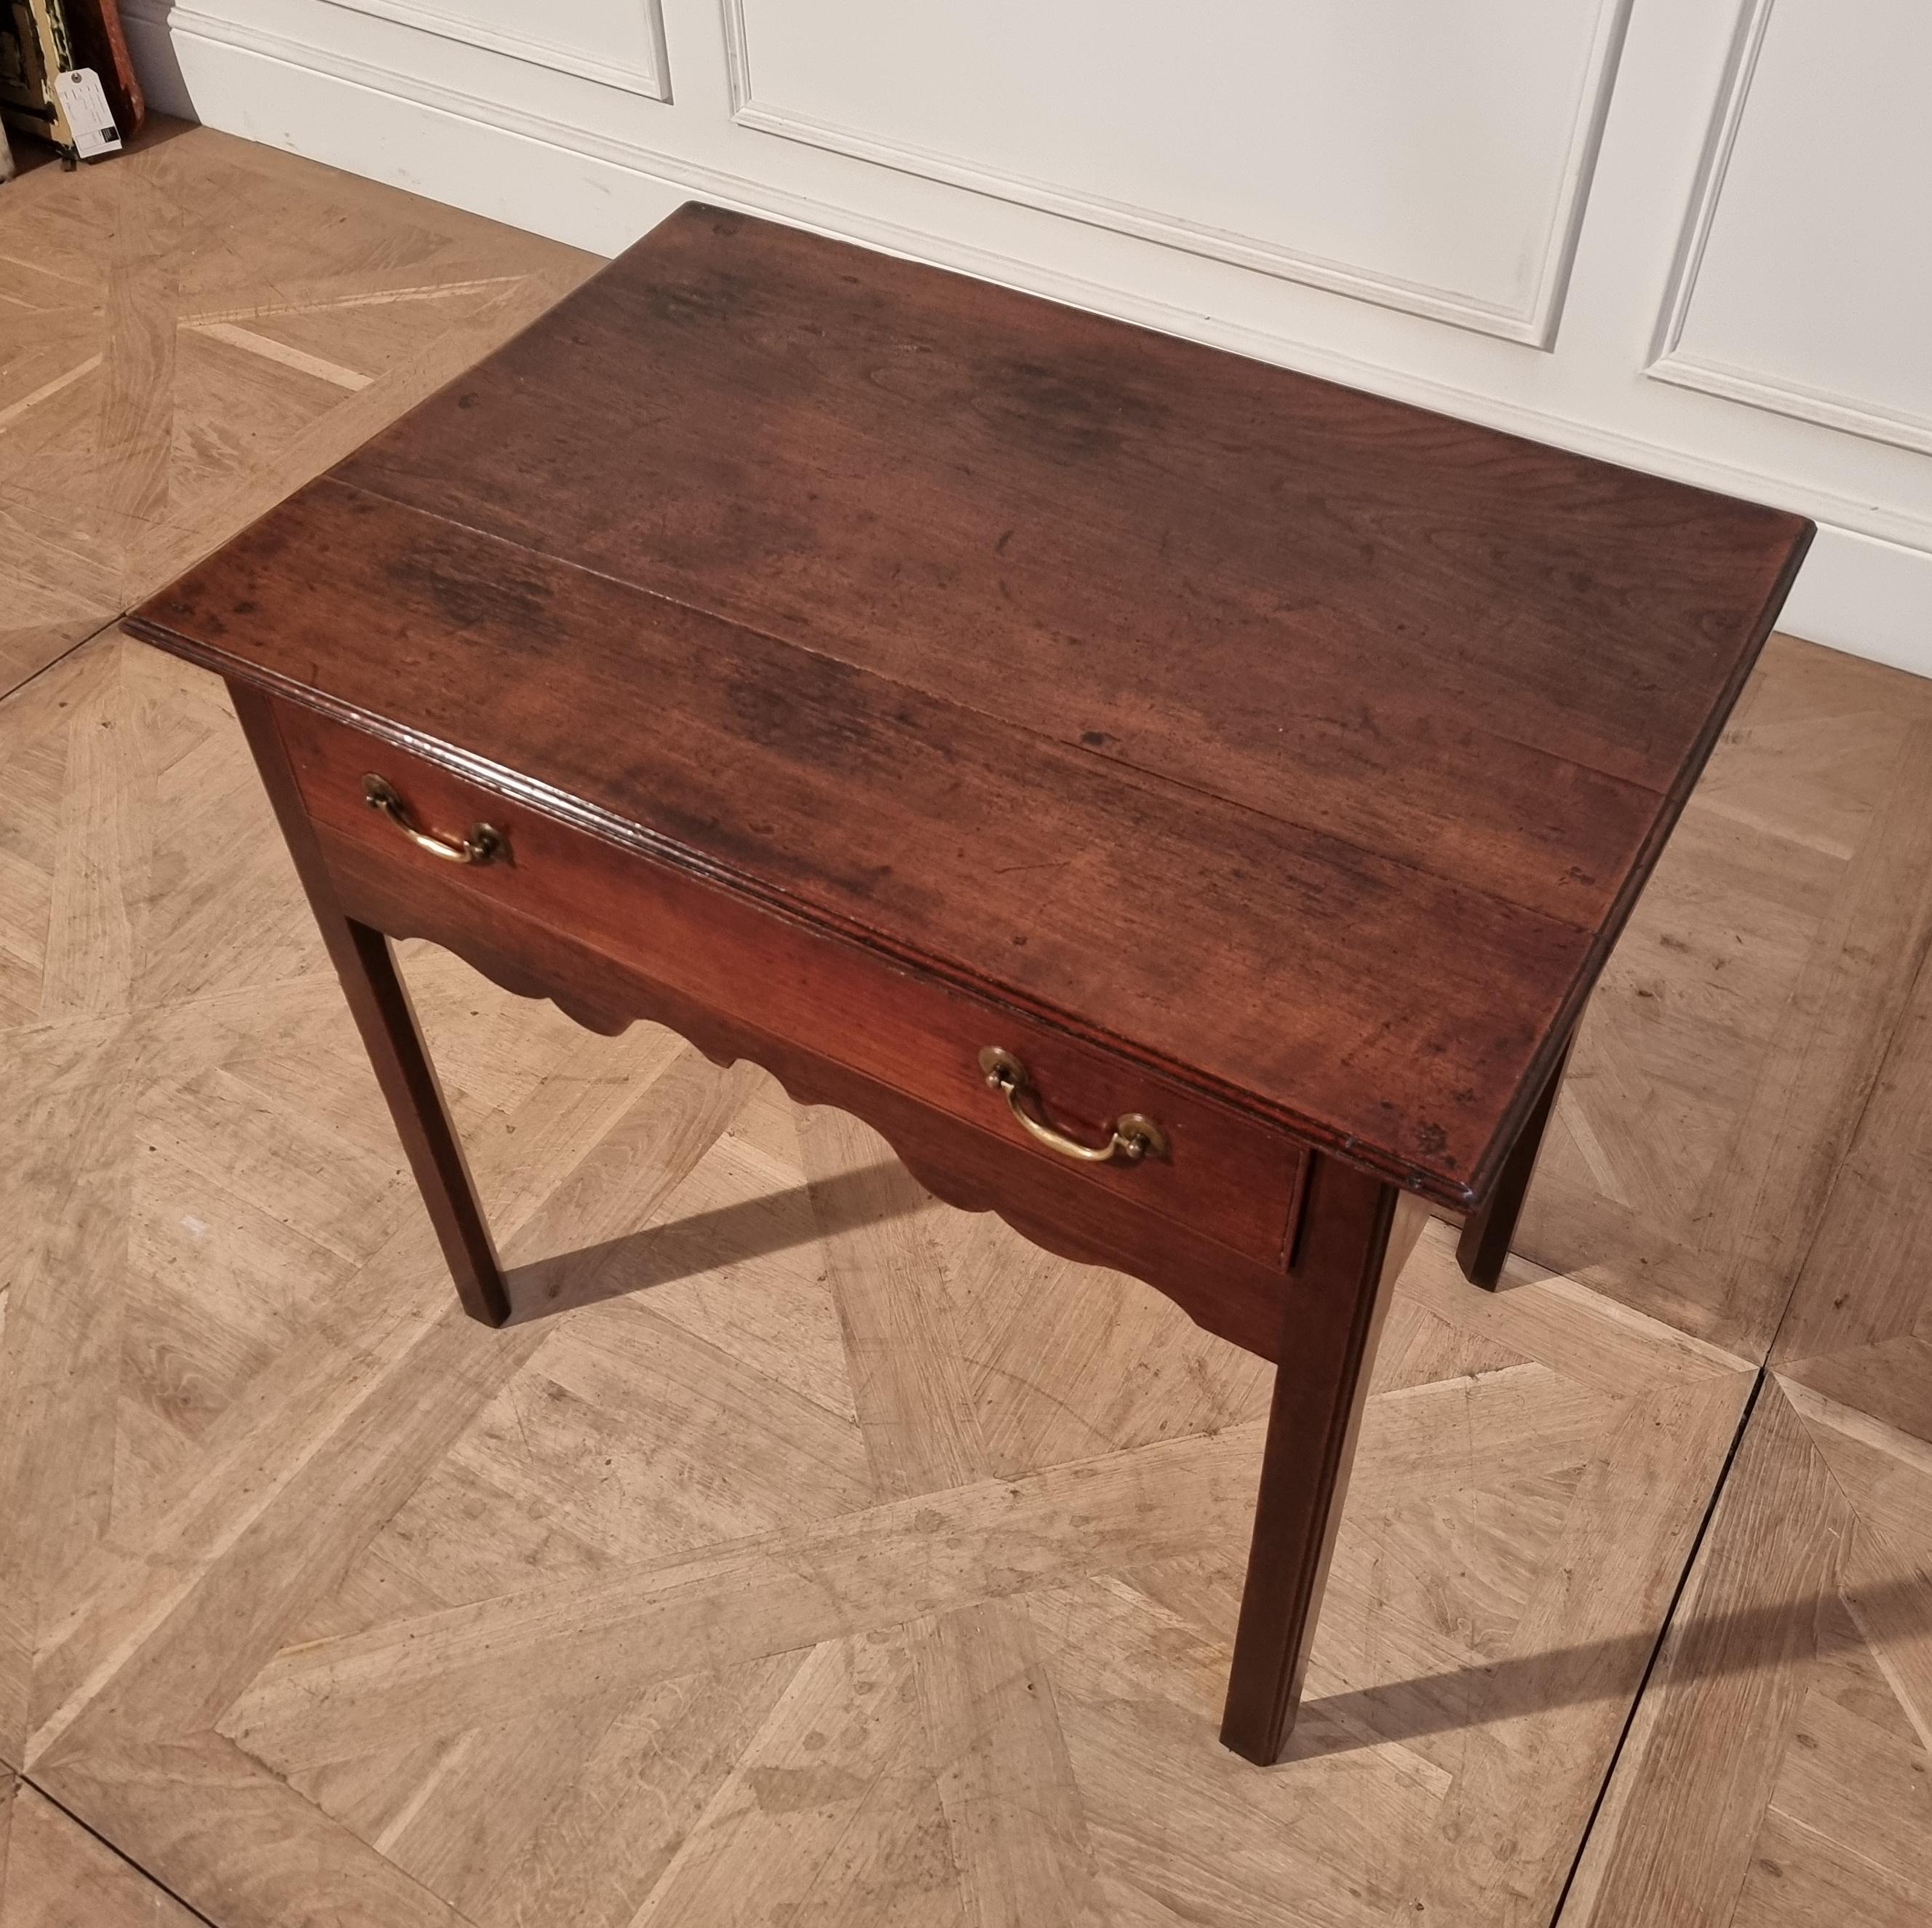 Small 18th C English mahogany 1 drawer lamp table. Wonderful colour. 1790.

Reference: 7653

Dimensions
31 inches (79 cms) Wide
21 inches (53 cms) Deep
28.5 inches (72 cms) High